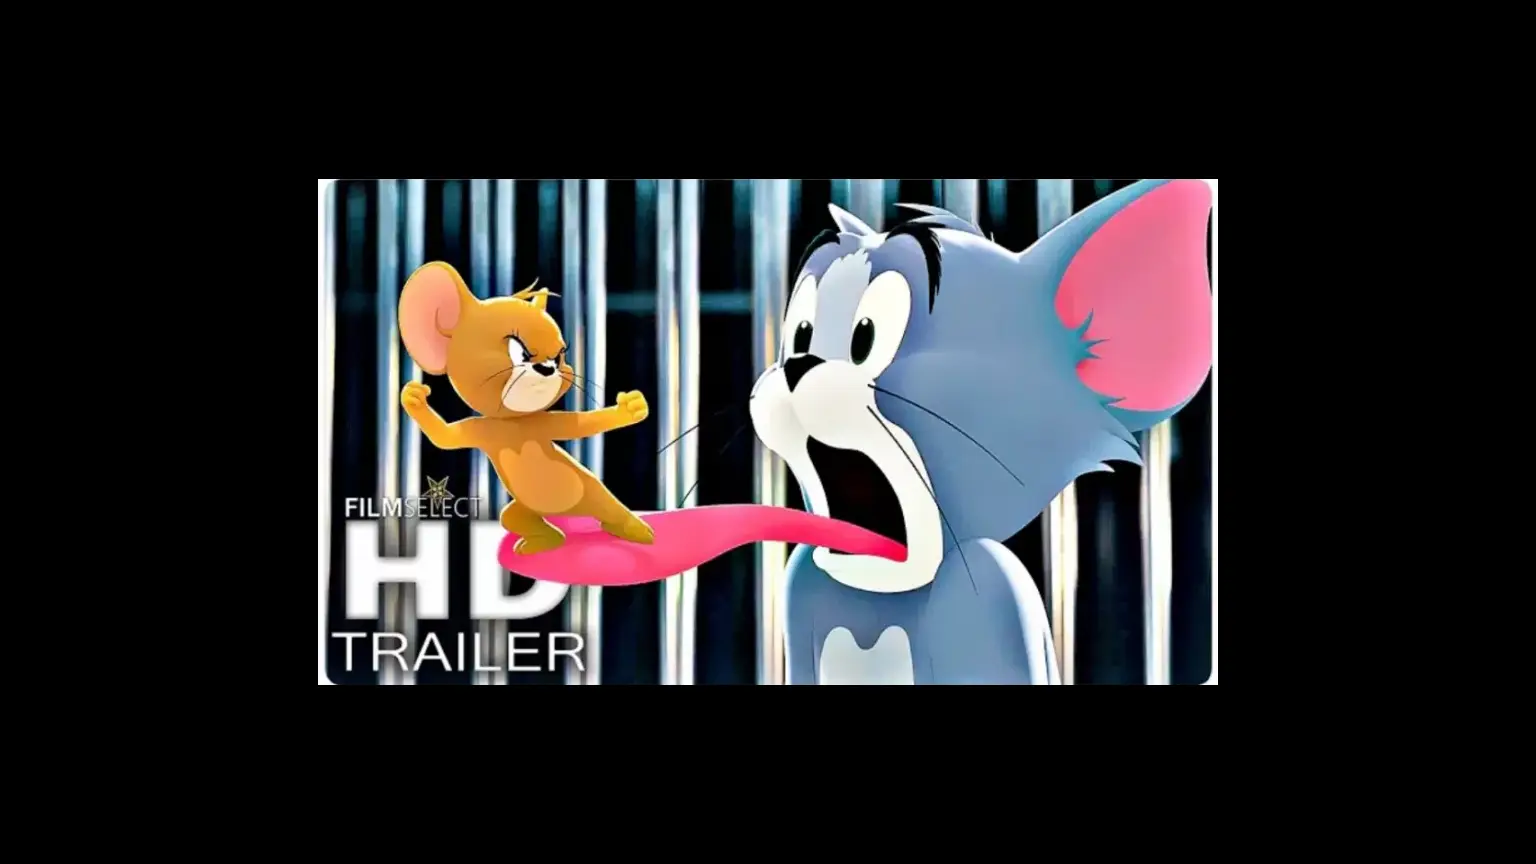 TOM AND JERRY Trailer (4K ULTRA HD) NEW 2021 